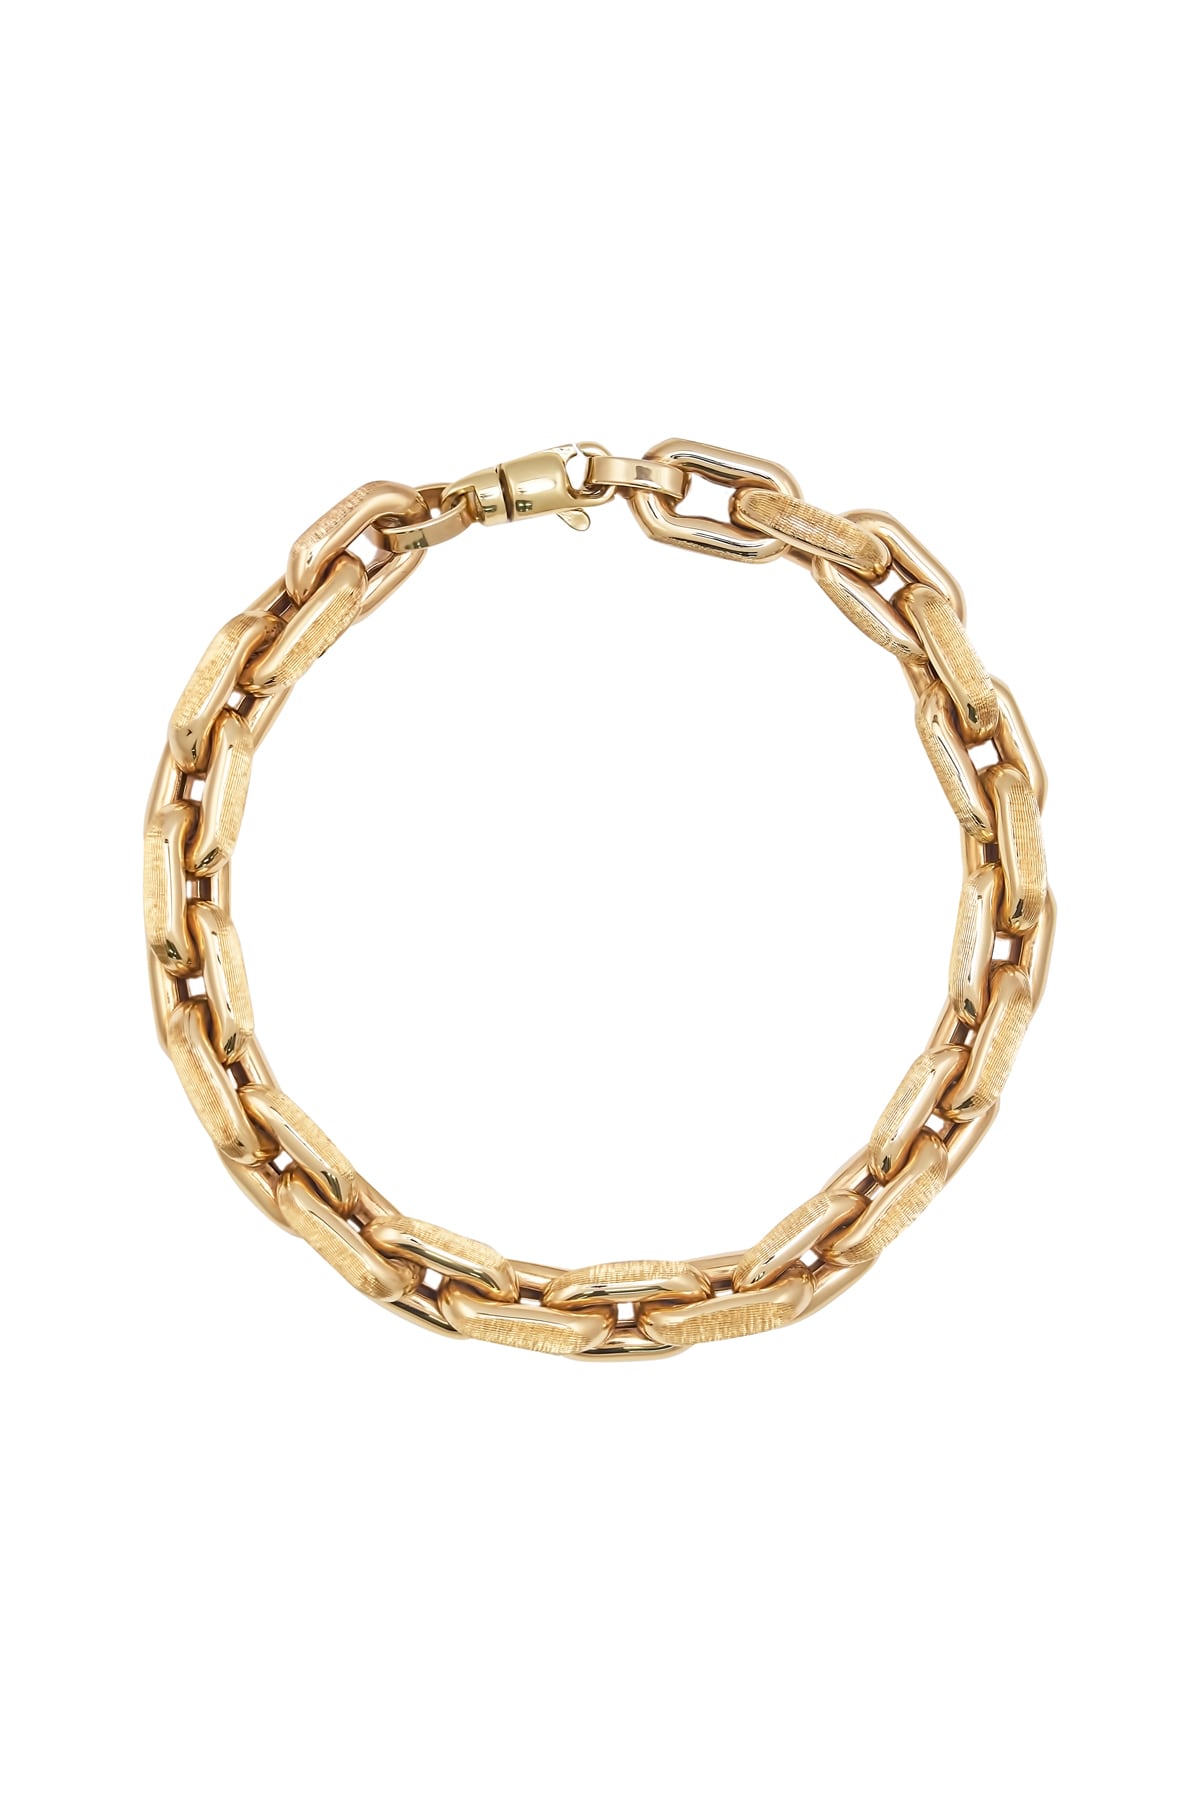 Fancy Oval Link Bracelet In 14ct Yellow Gold from LeGassick.